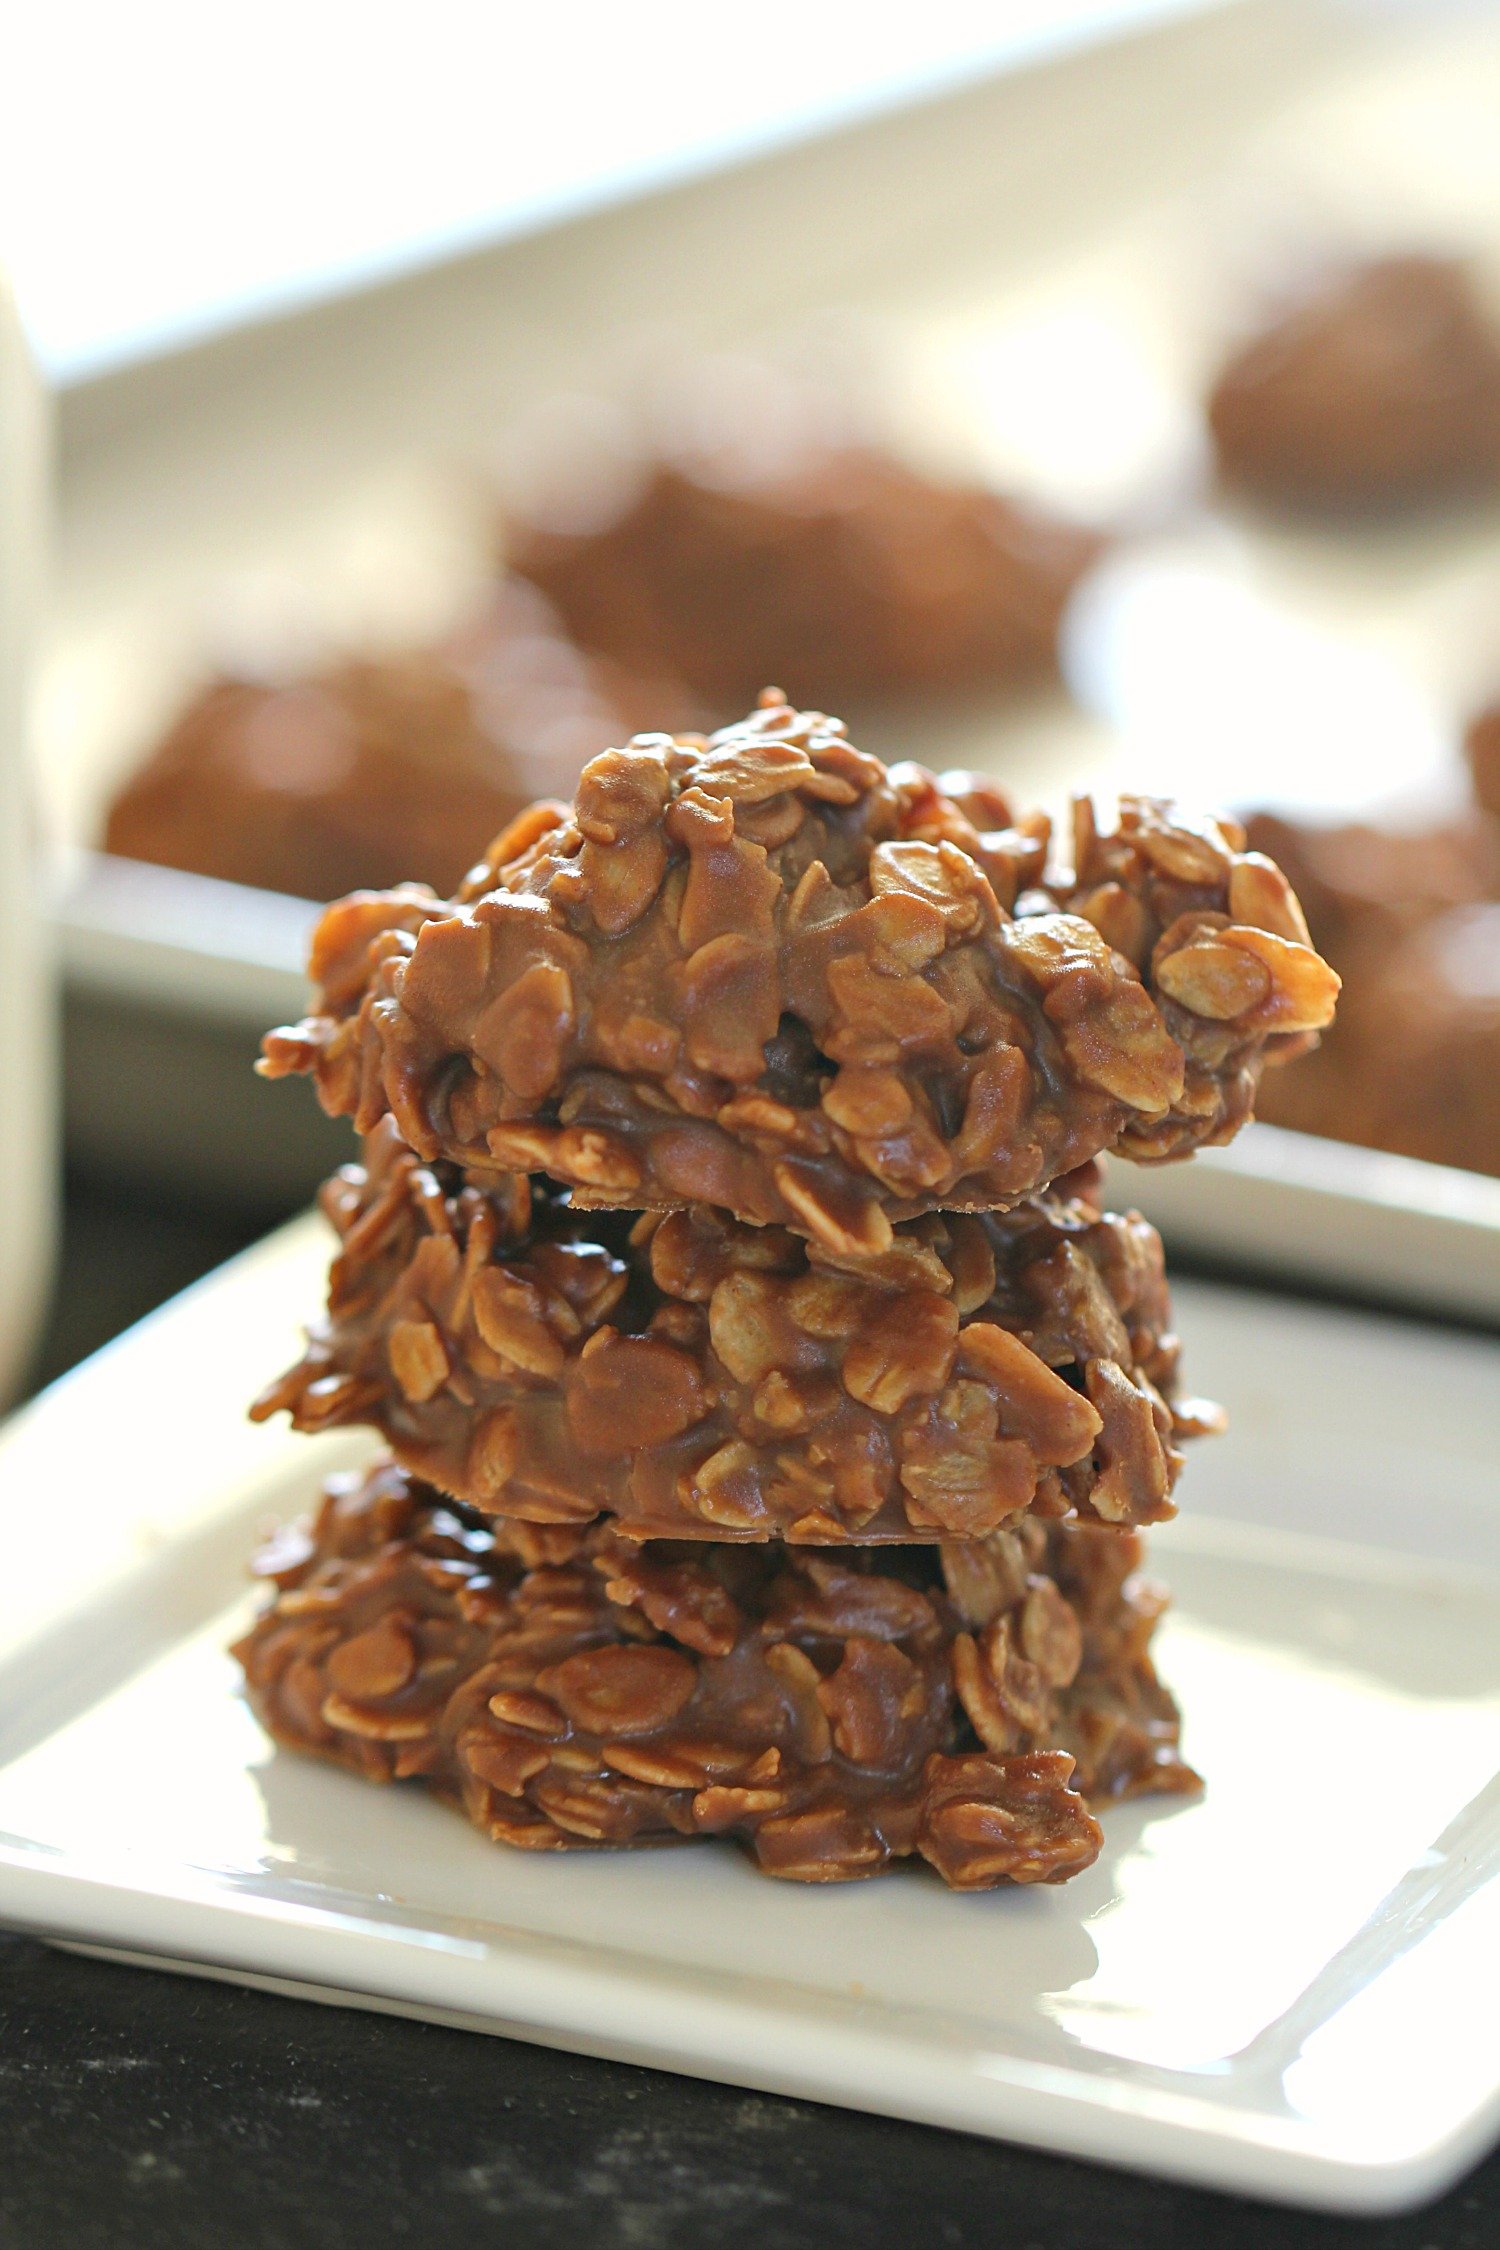 Healthier No Bake Chocolate Peanut Butter Cookies stacked on a white plate
